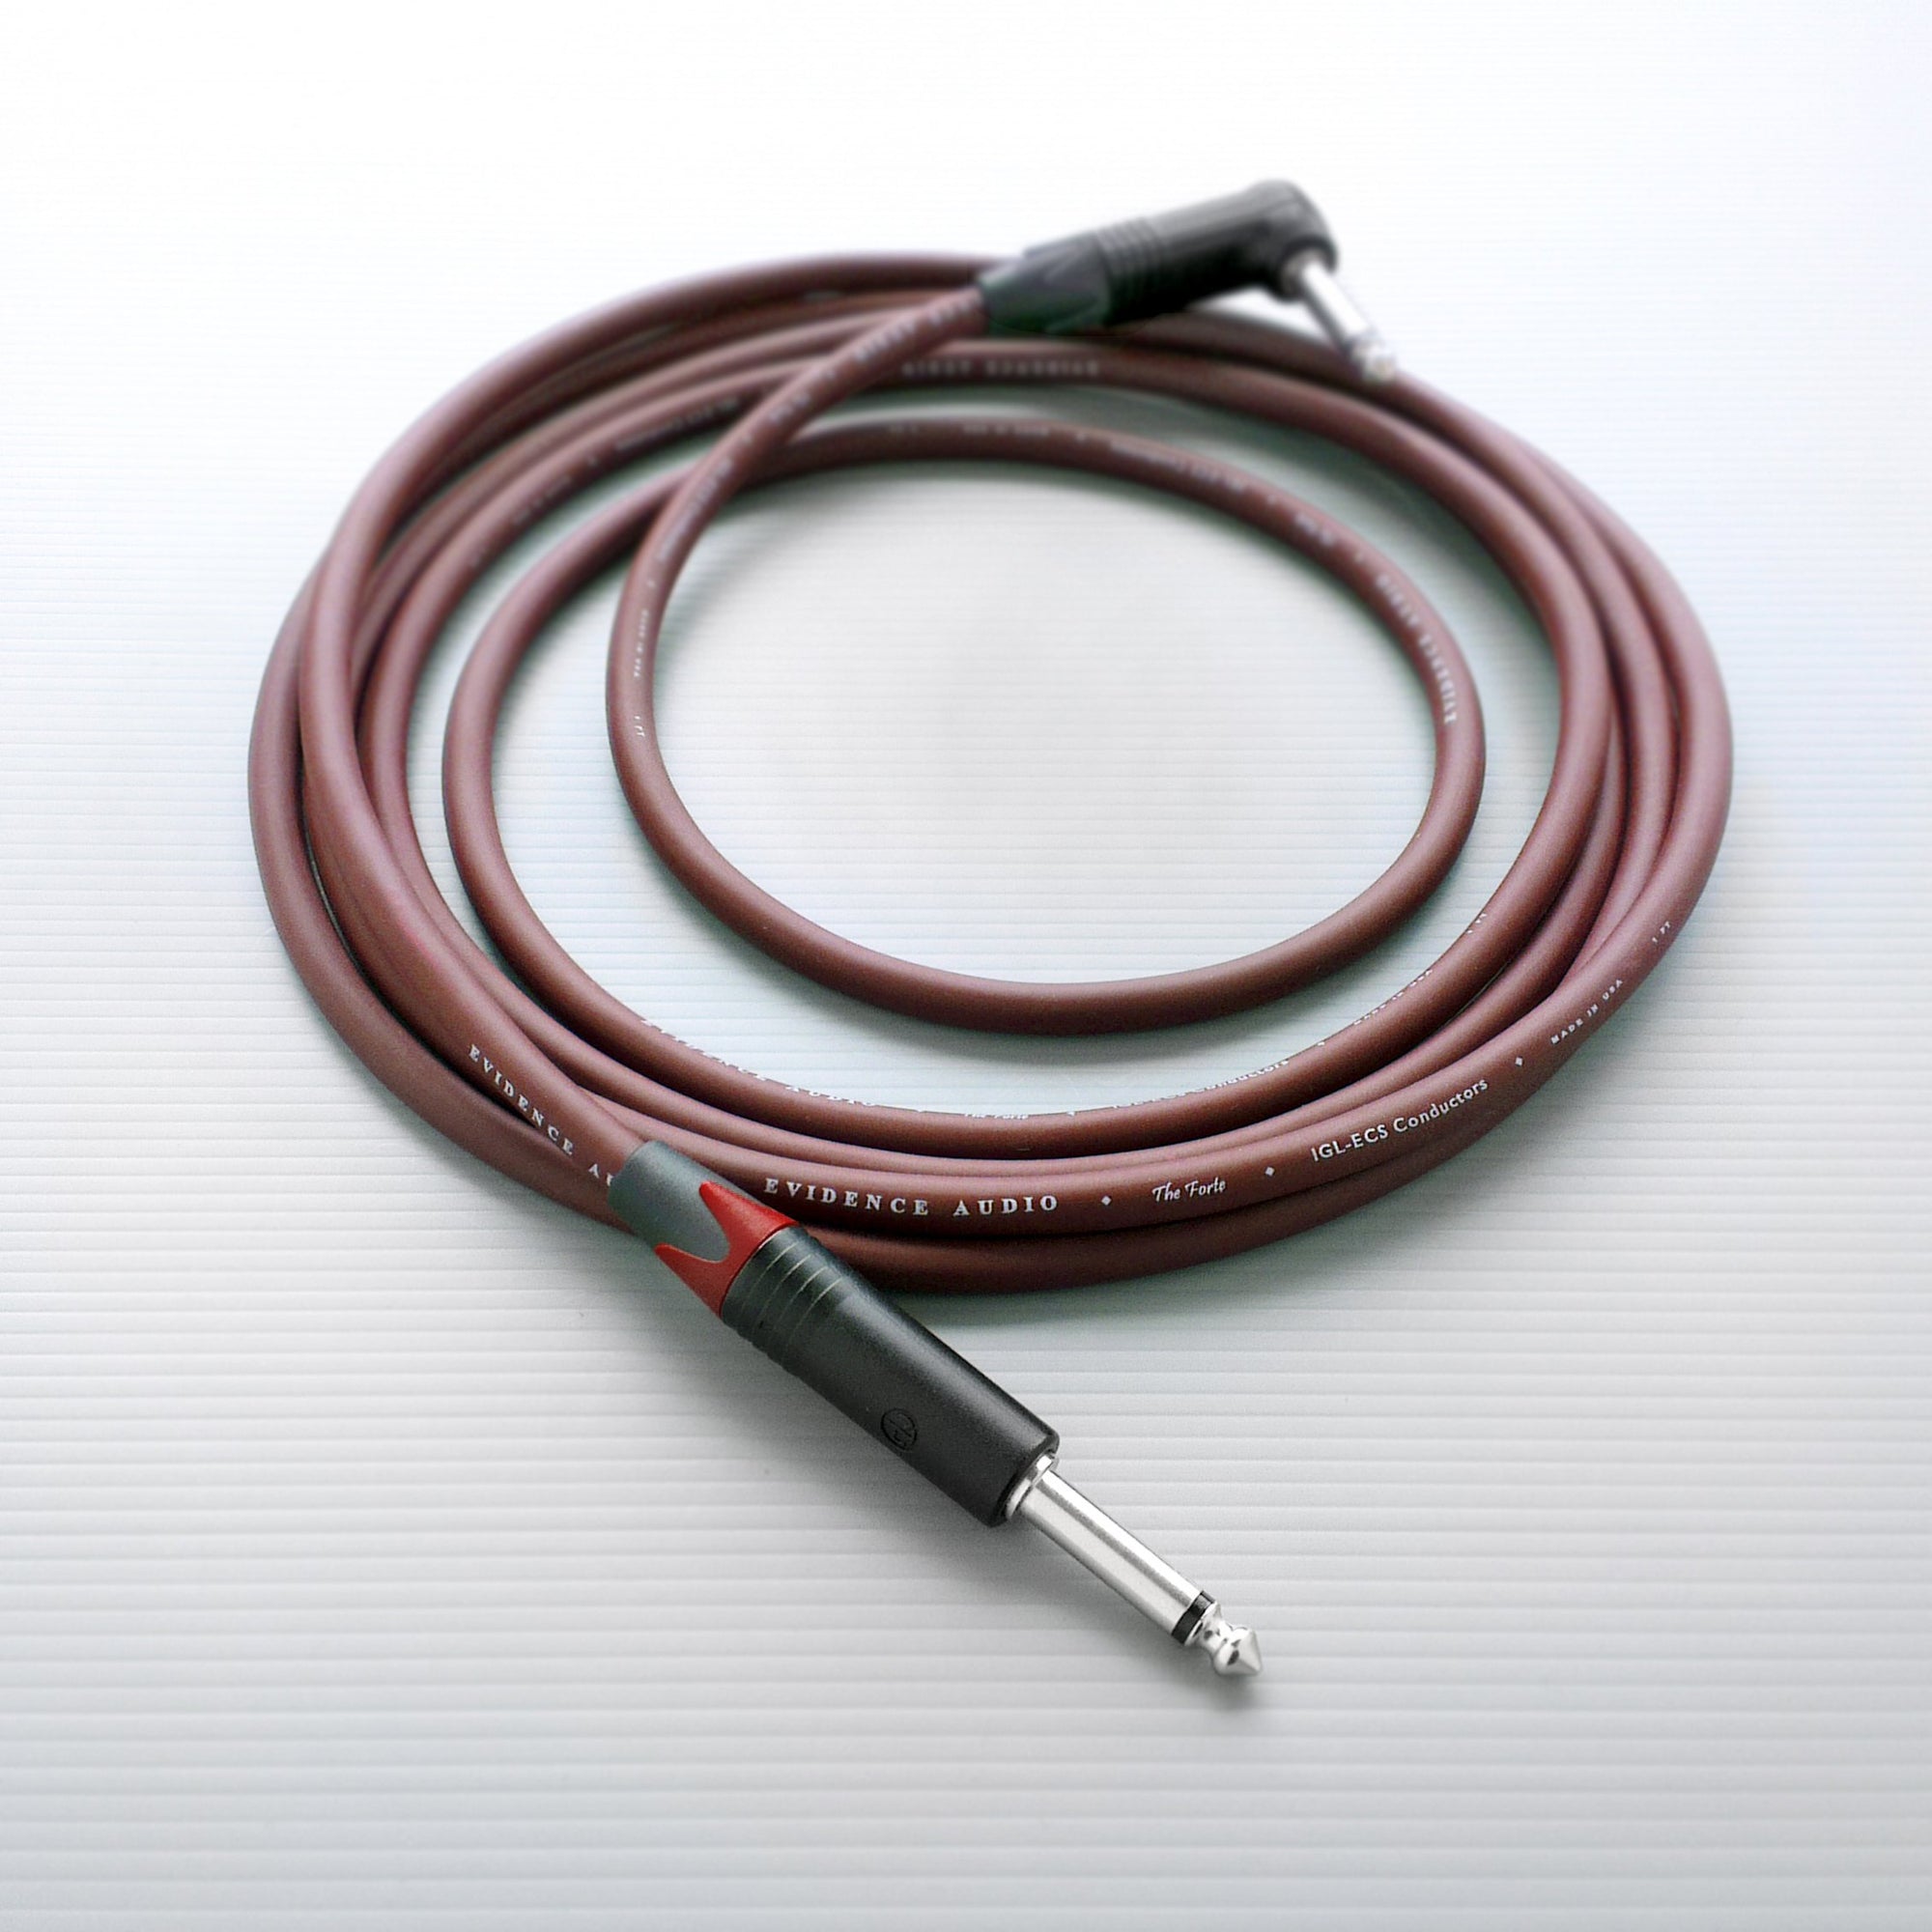 Evidence Audio Forte Guitar Cable - 15ft: Right Angle to Straight